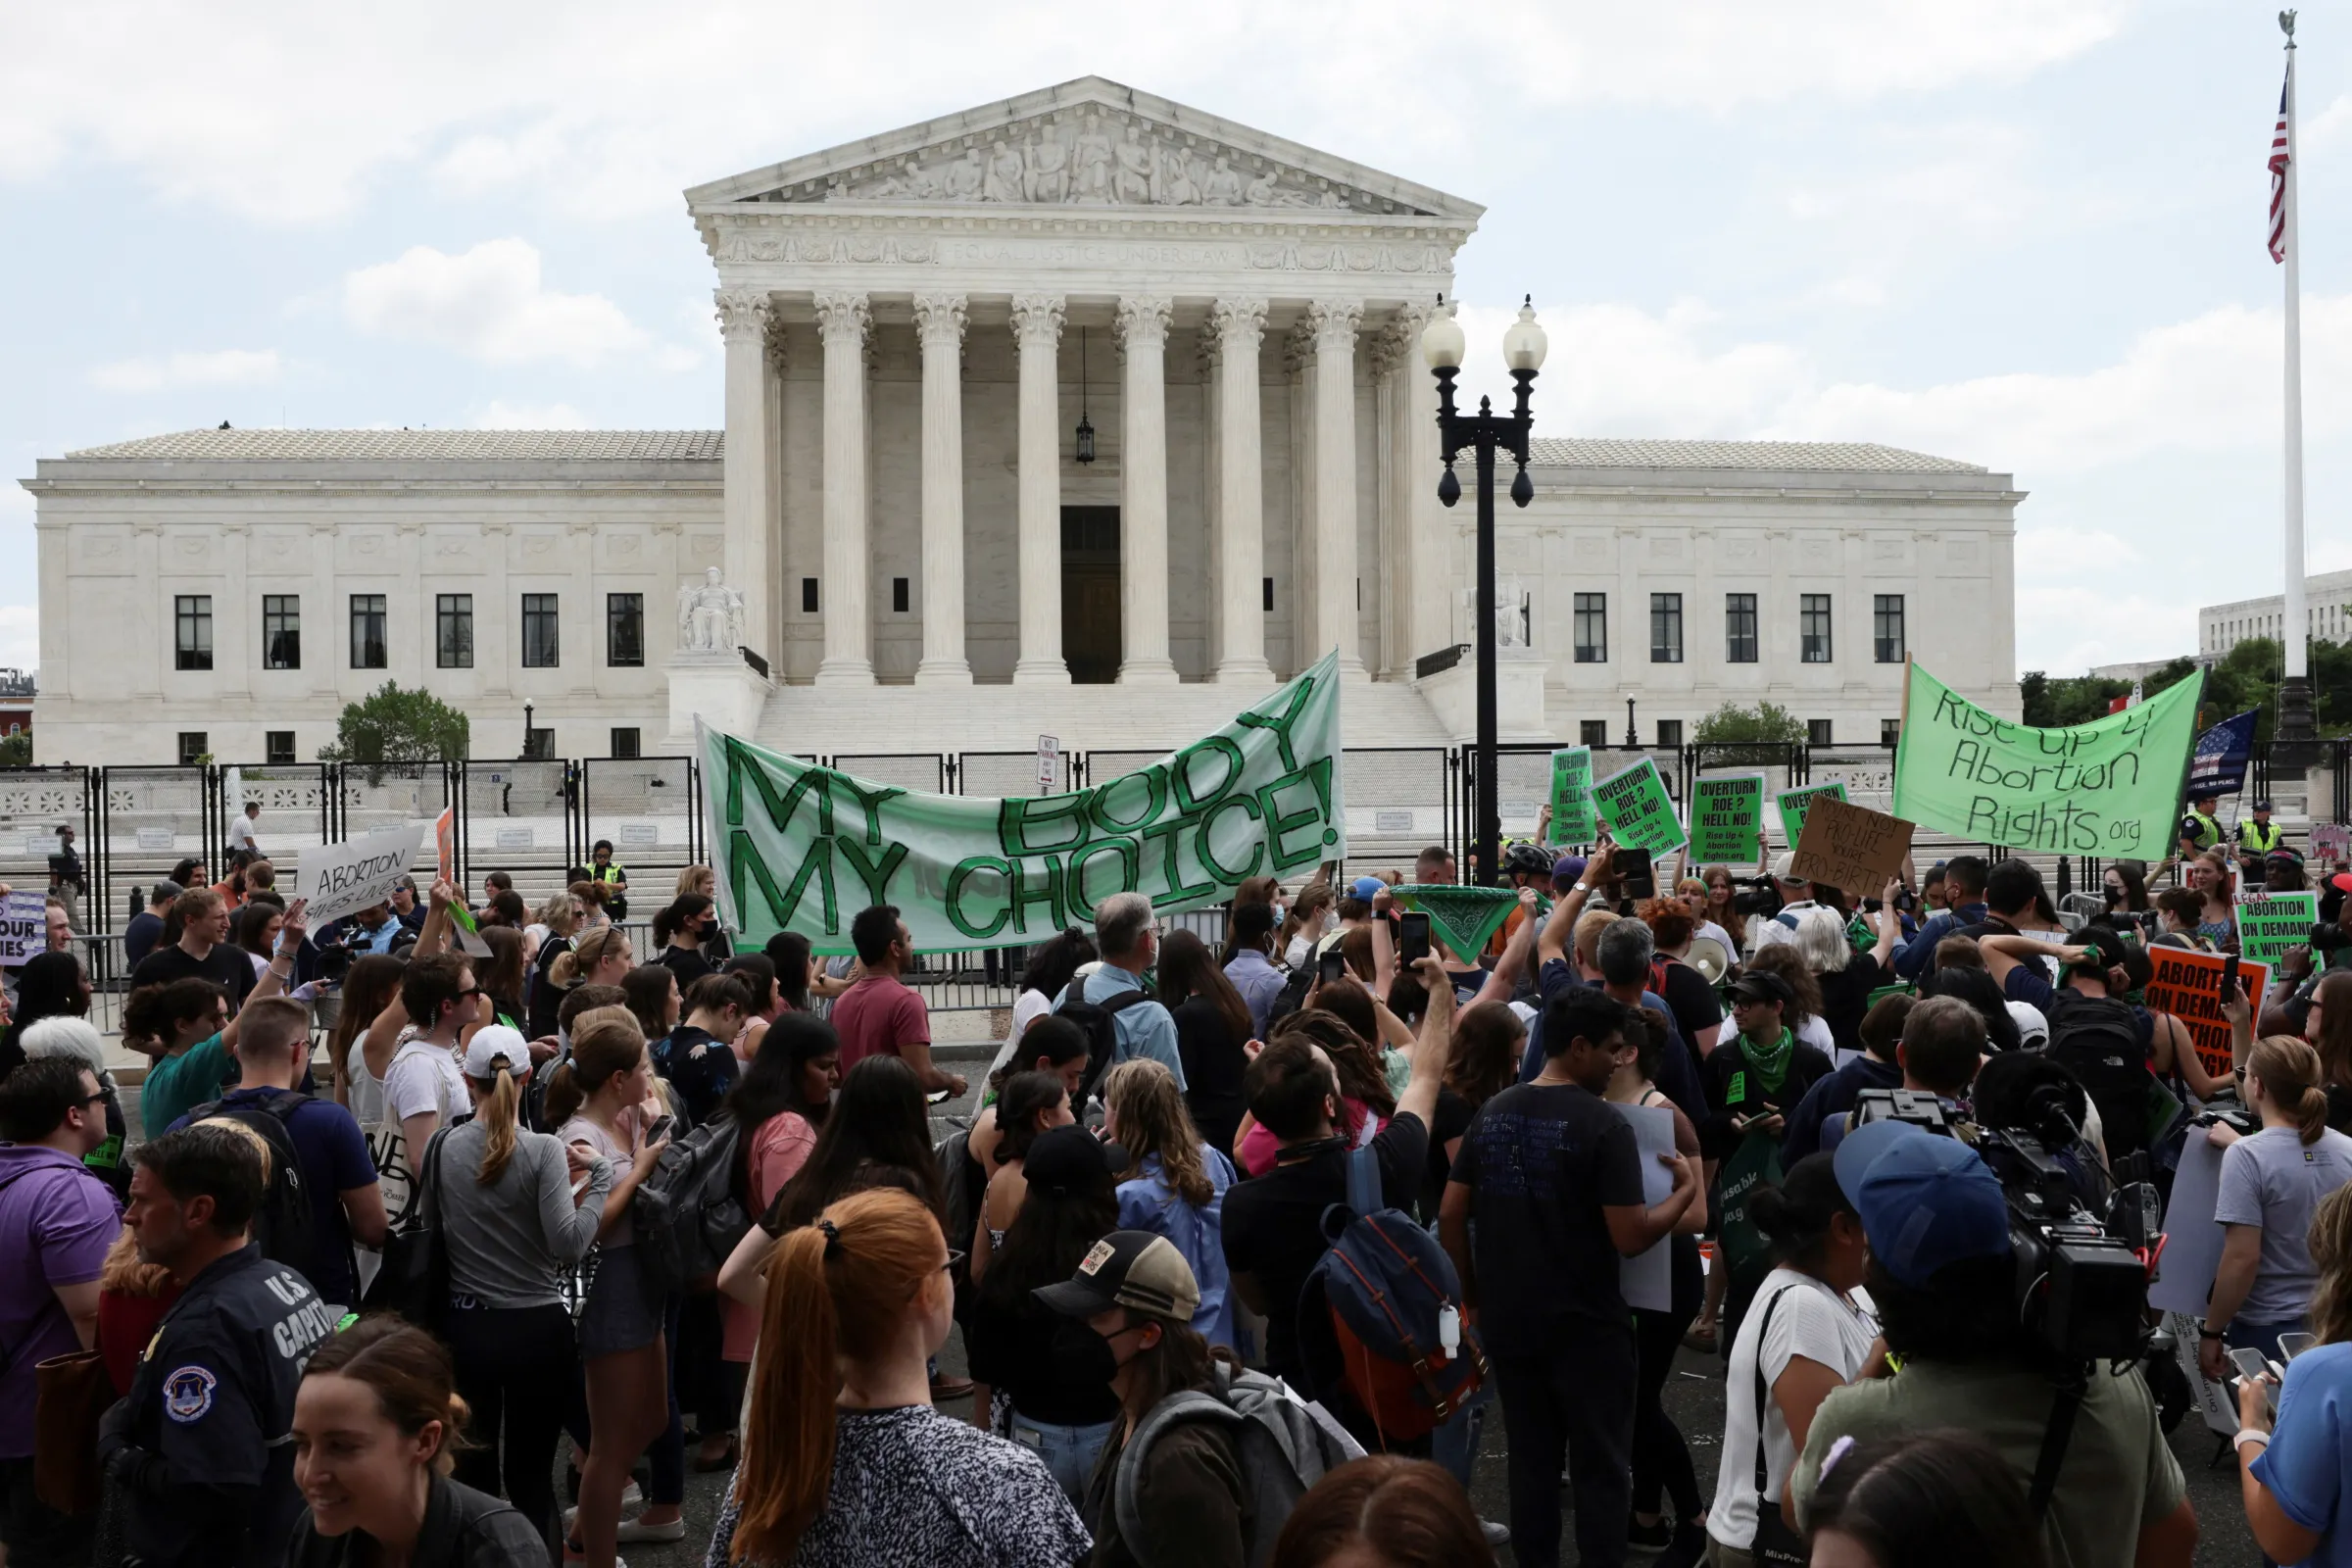 Abortion rights demonstrators protest outside the United States Supreme Court